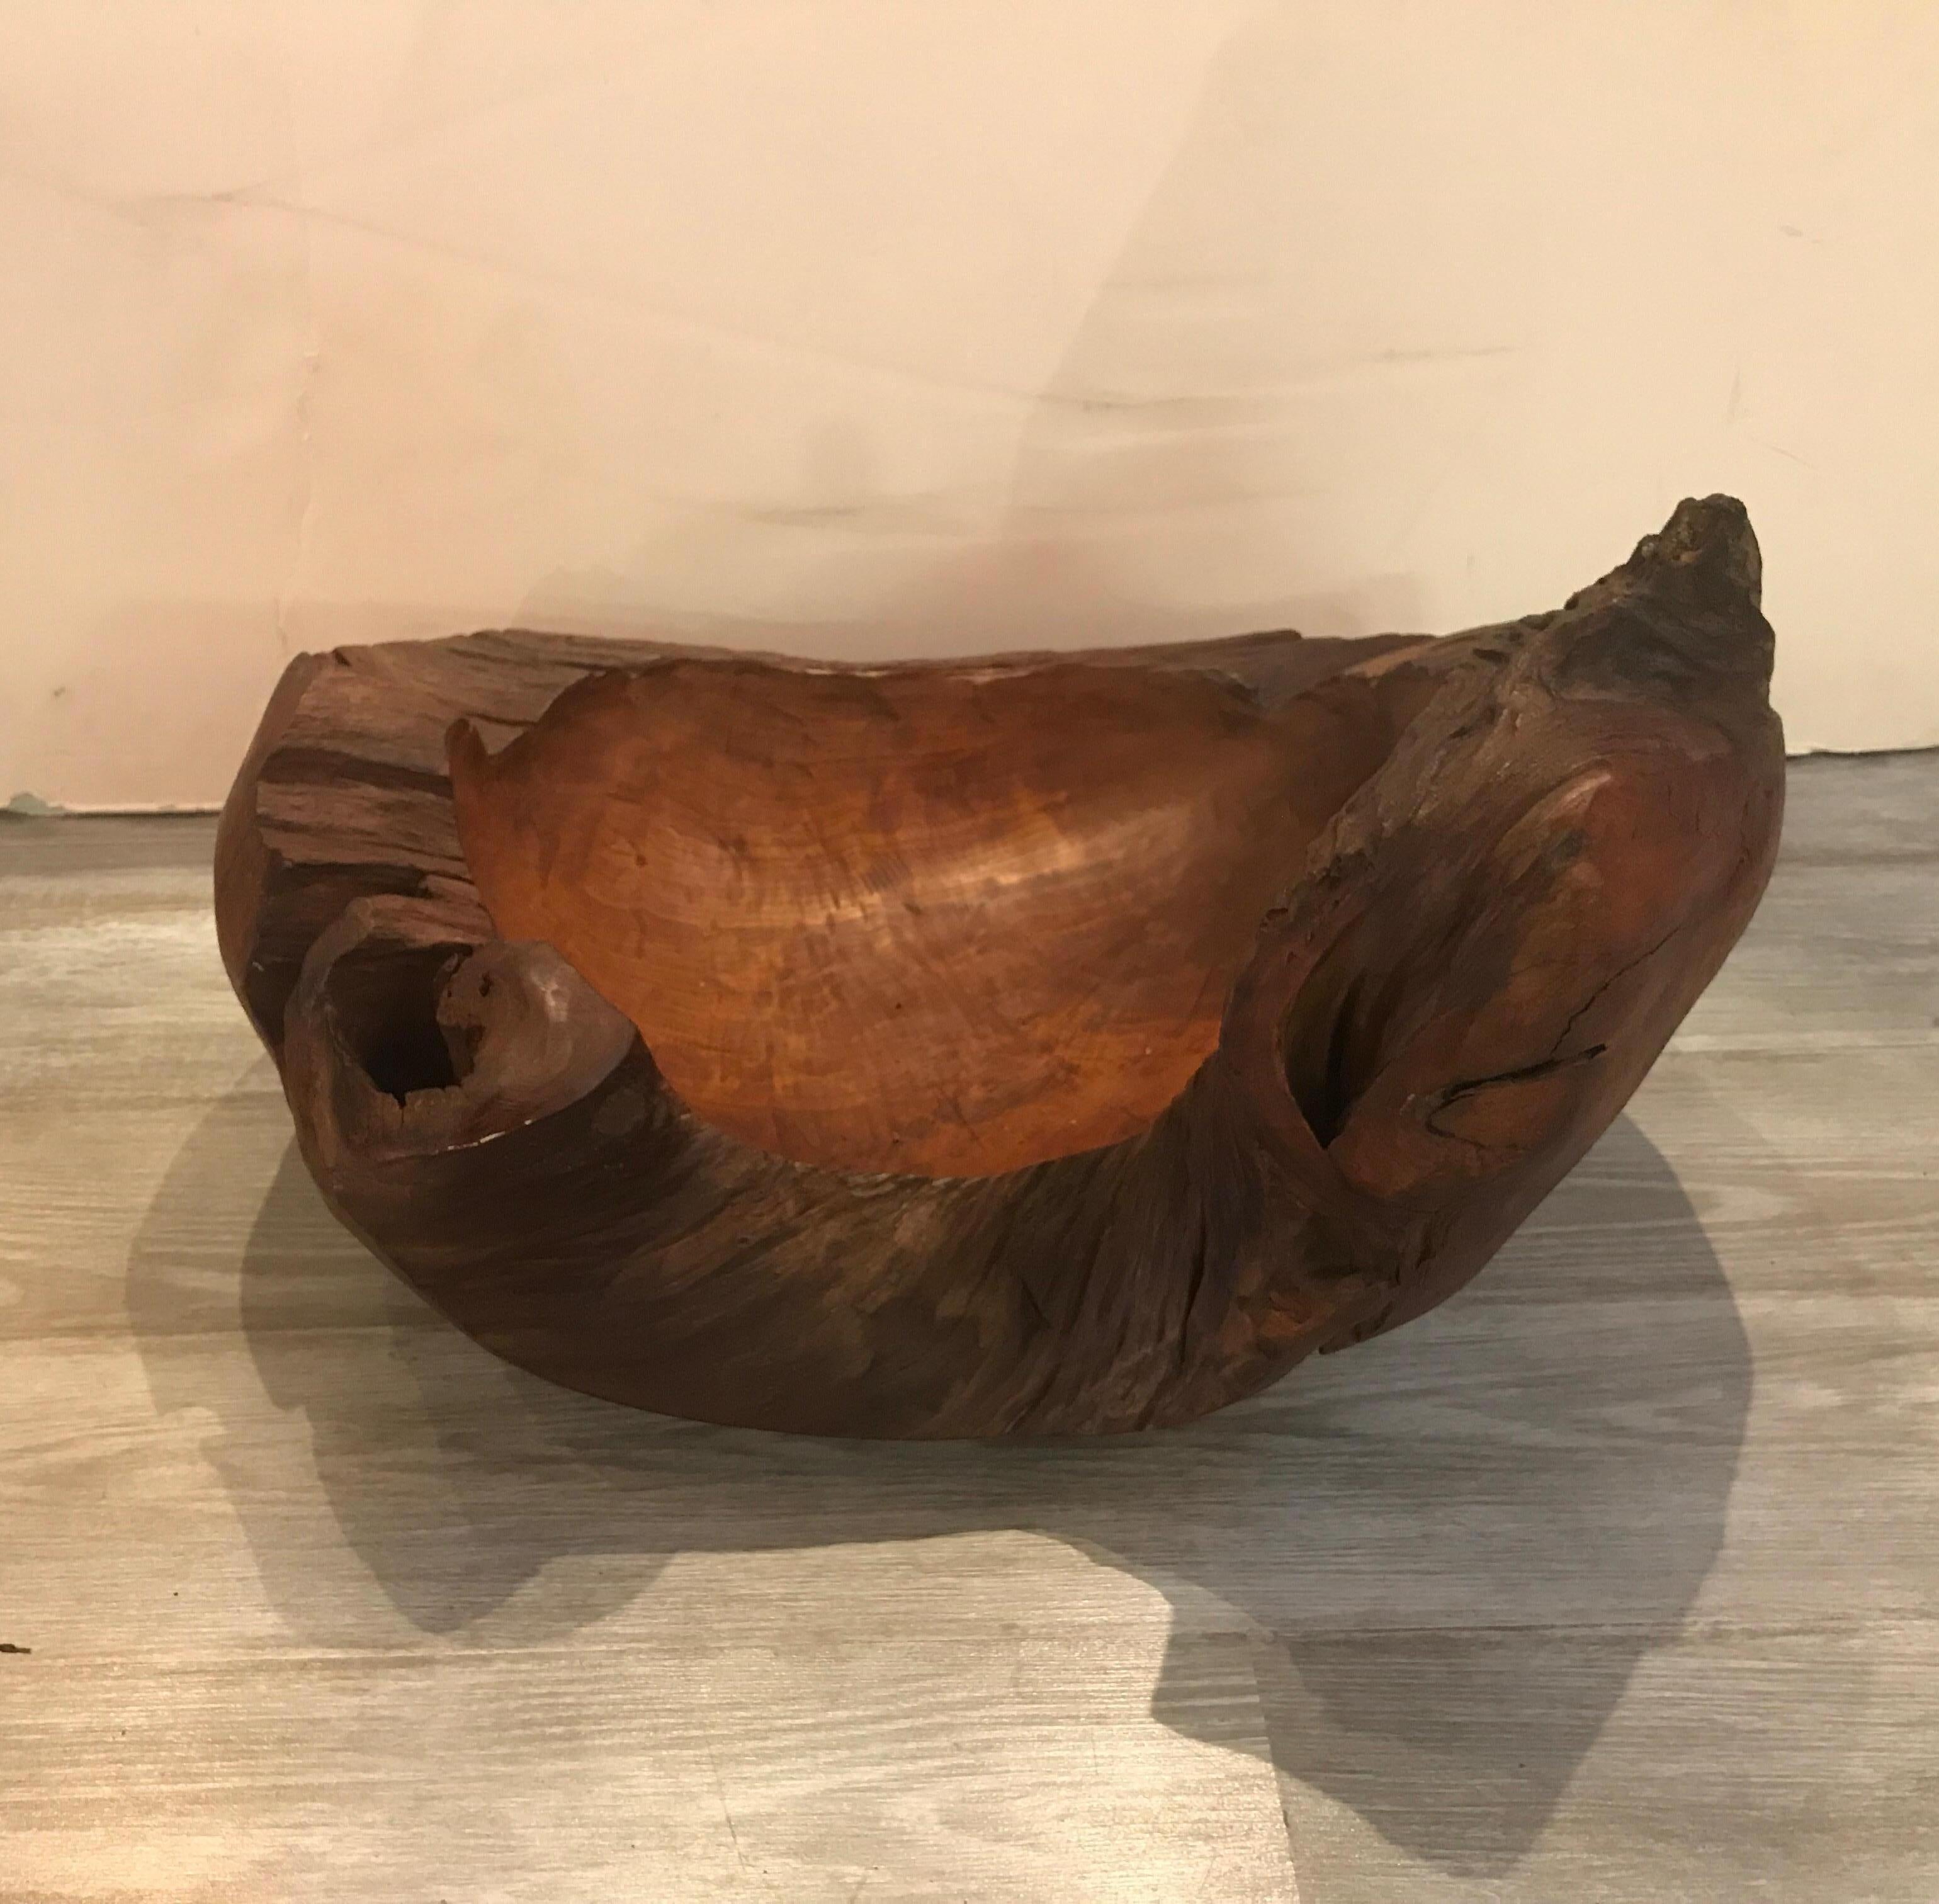 Unusual and highly figurative hand carved artisan bowl, mid-20th century, American. This one of a kind hand carved bowl is made from a single large piece of wood. Very earthy and organic.